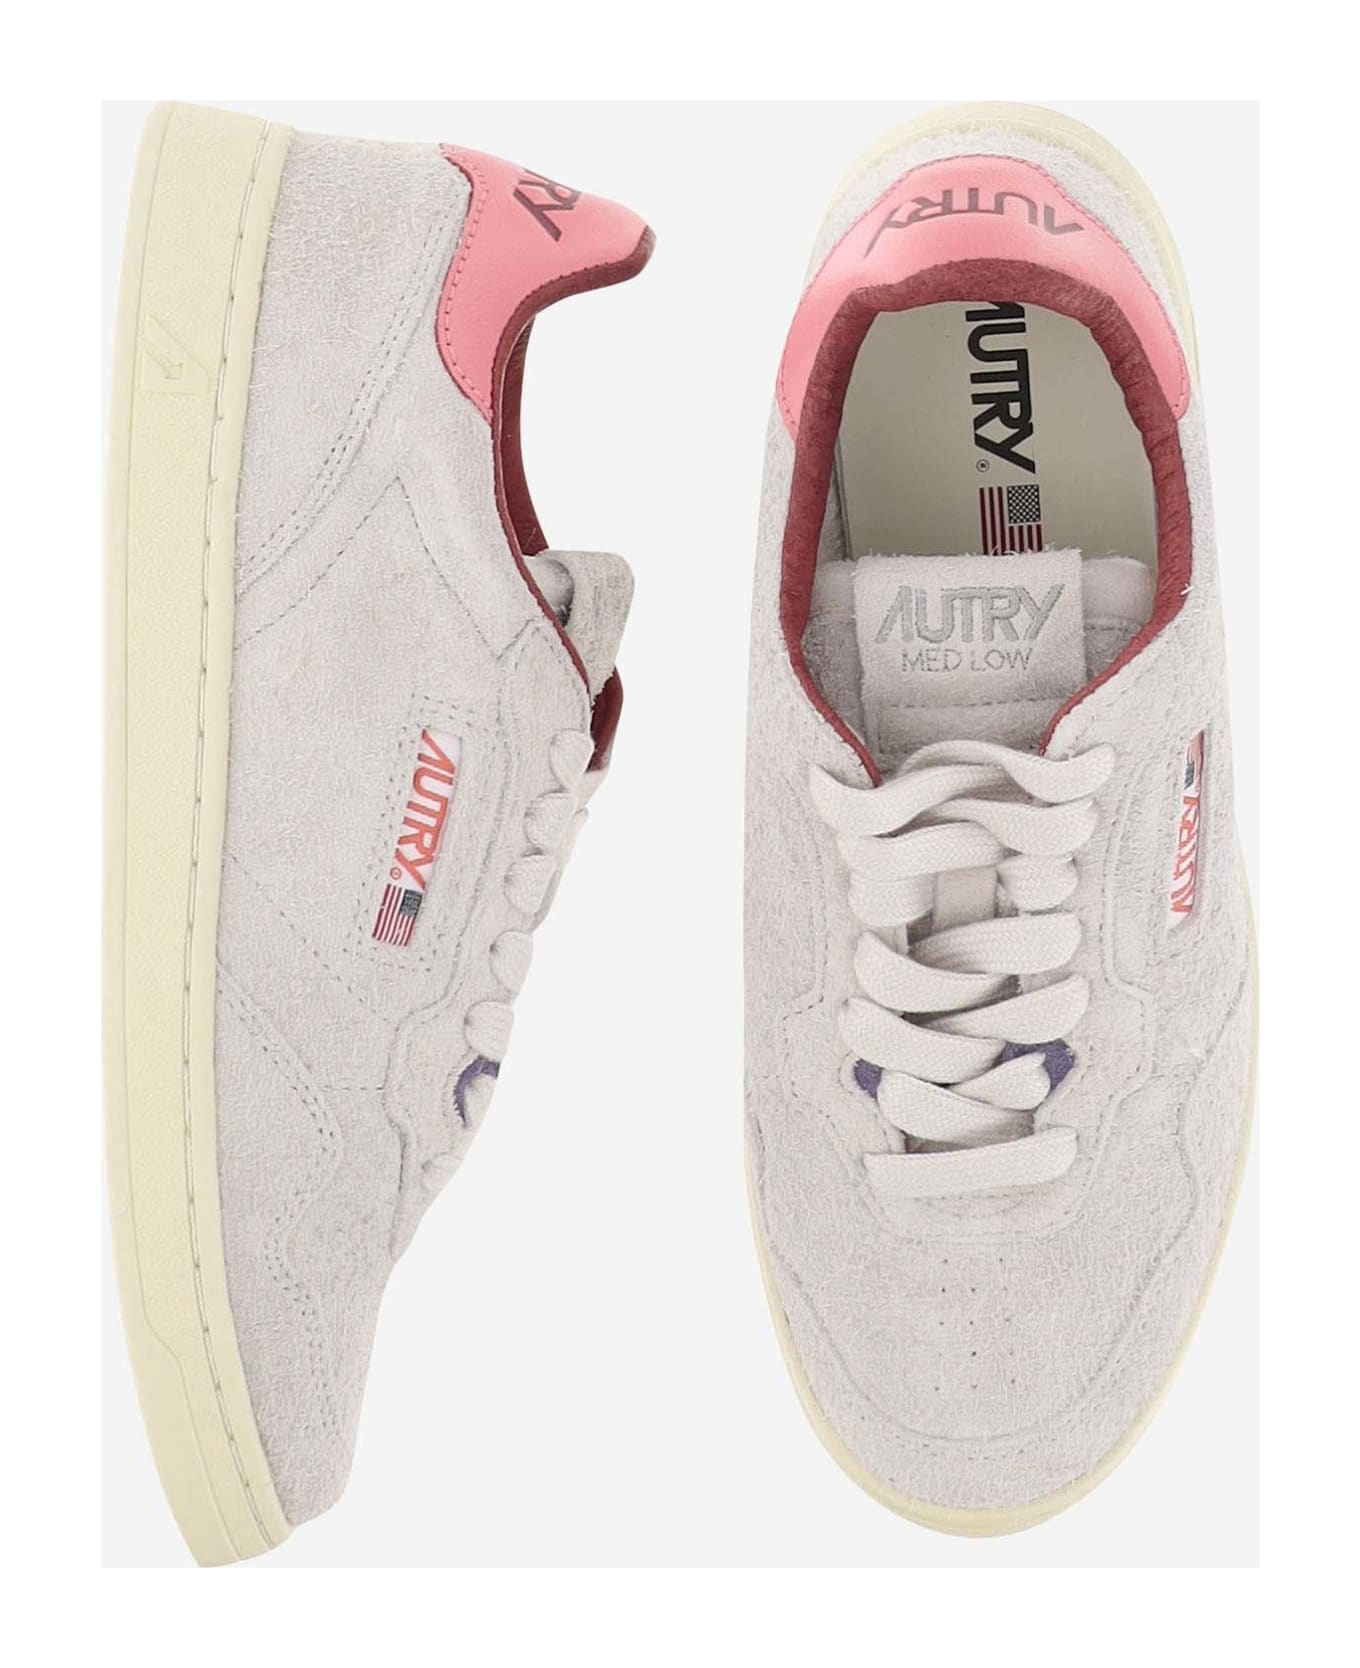 Autry Medalist Low Sneakers In Suede Hair Sand Effect - Grey